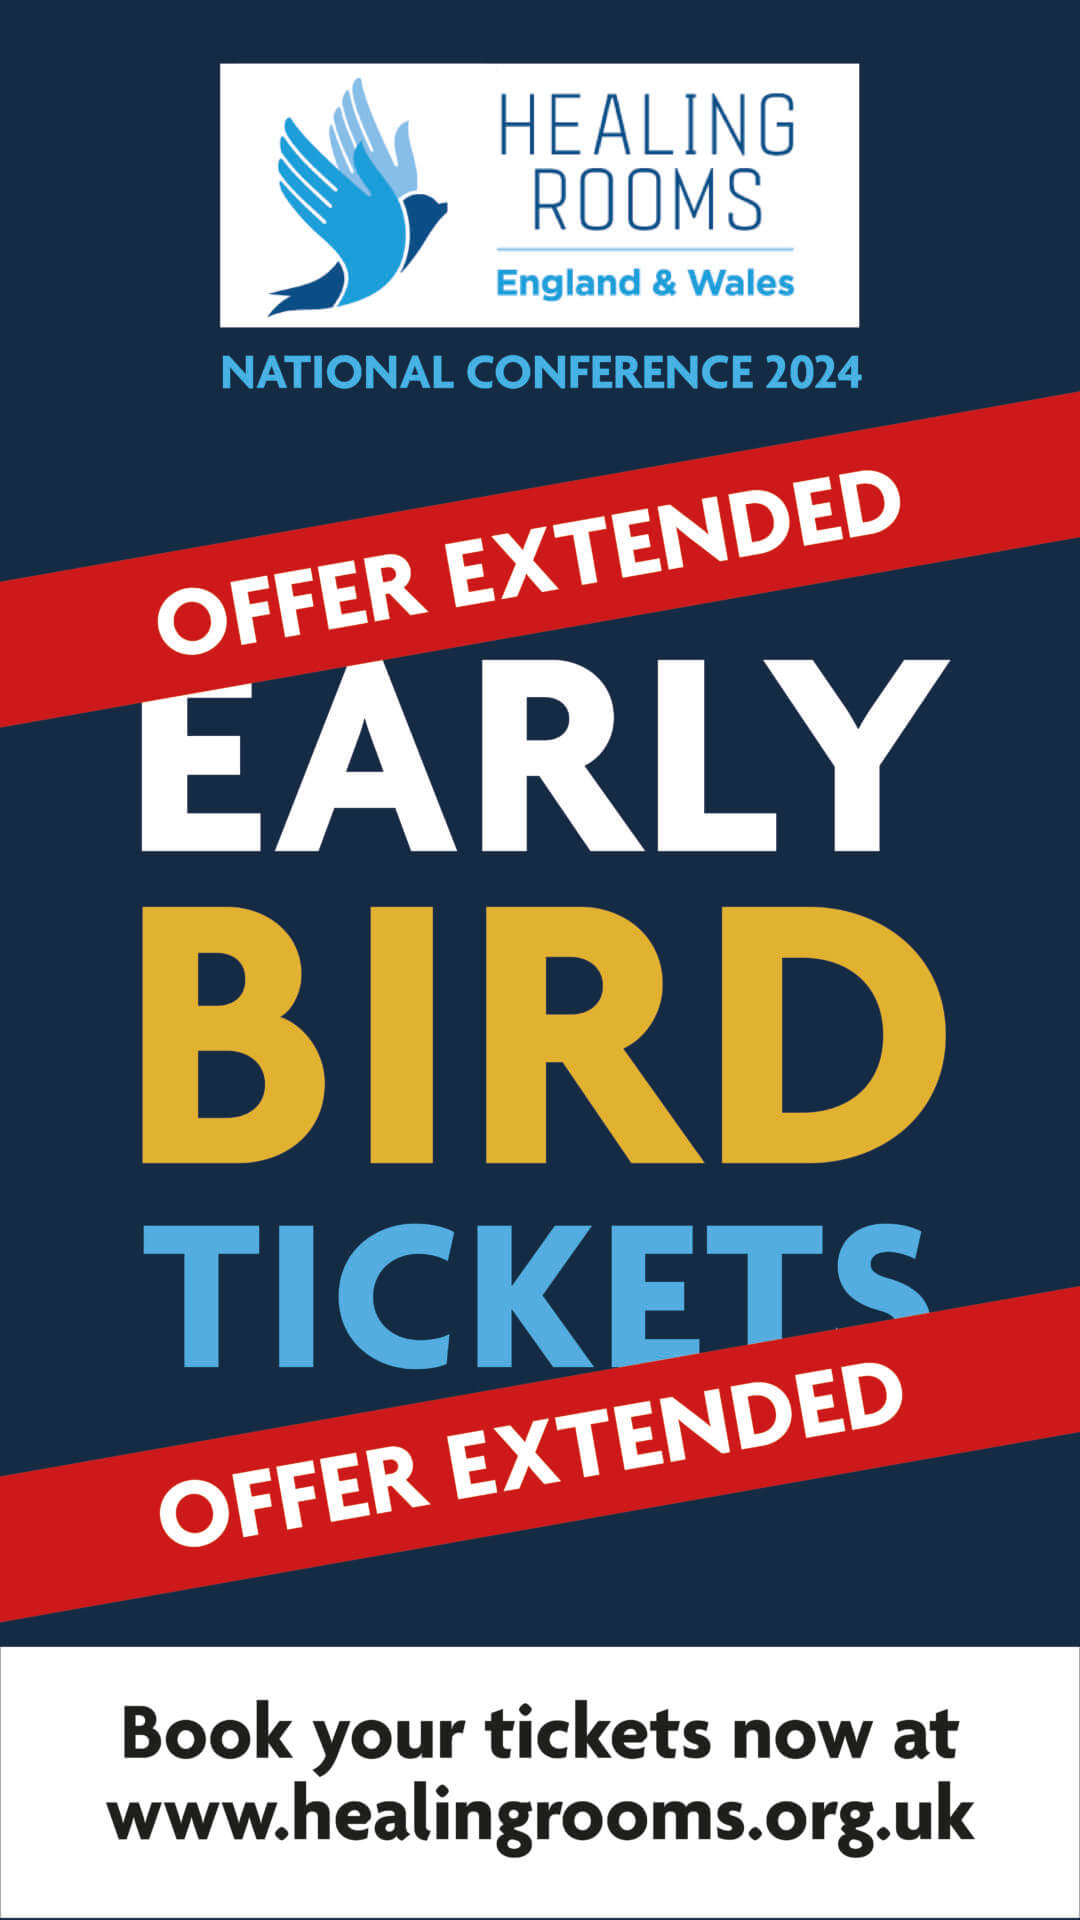 Early Bird Ticket Discount until 14 February 2024